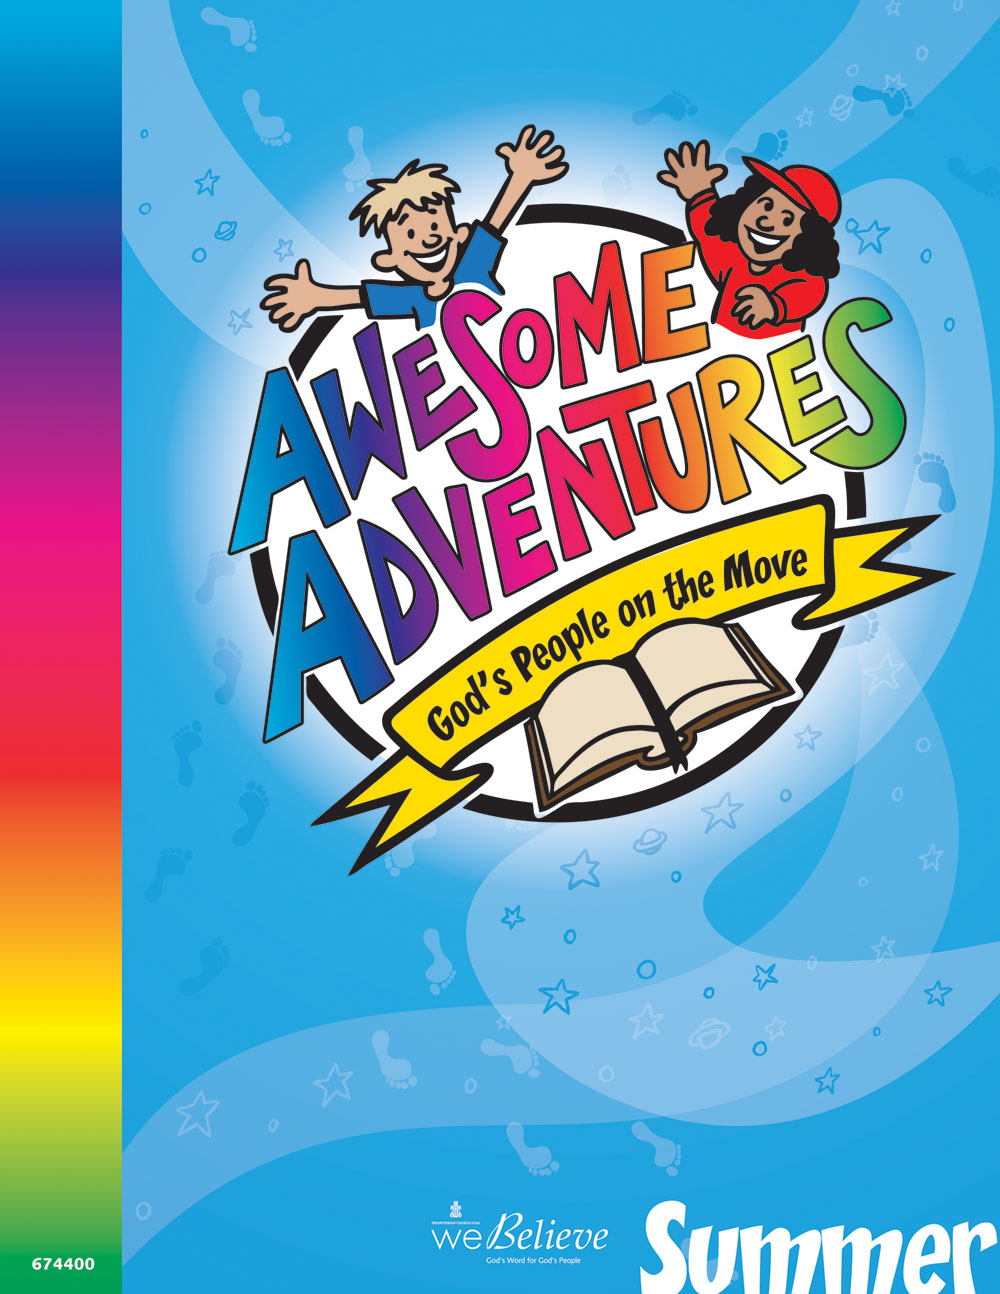 Awesome Adventures: God's People on the Move